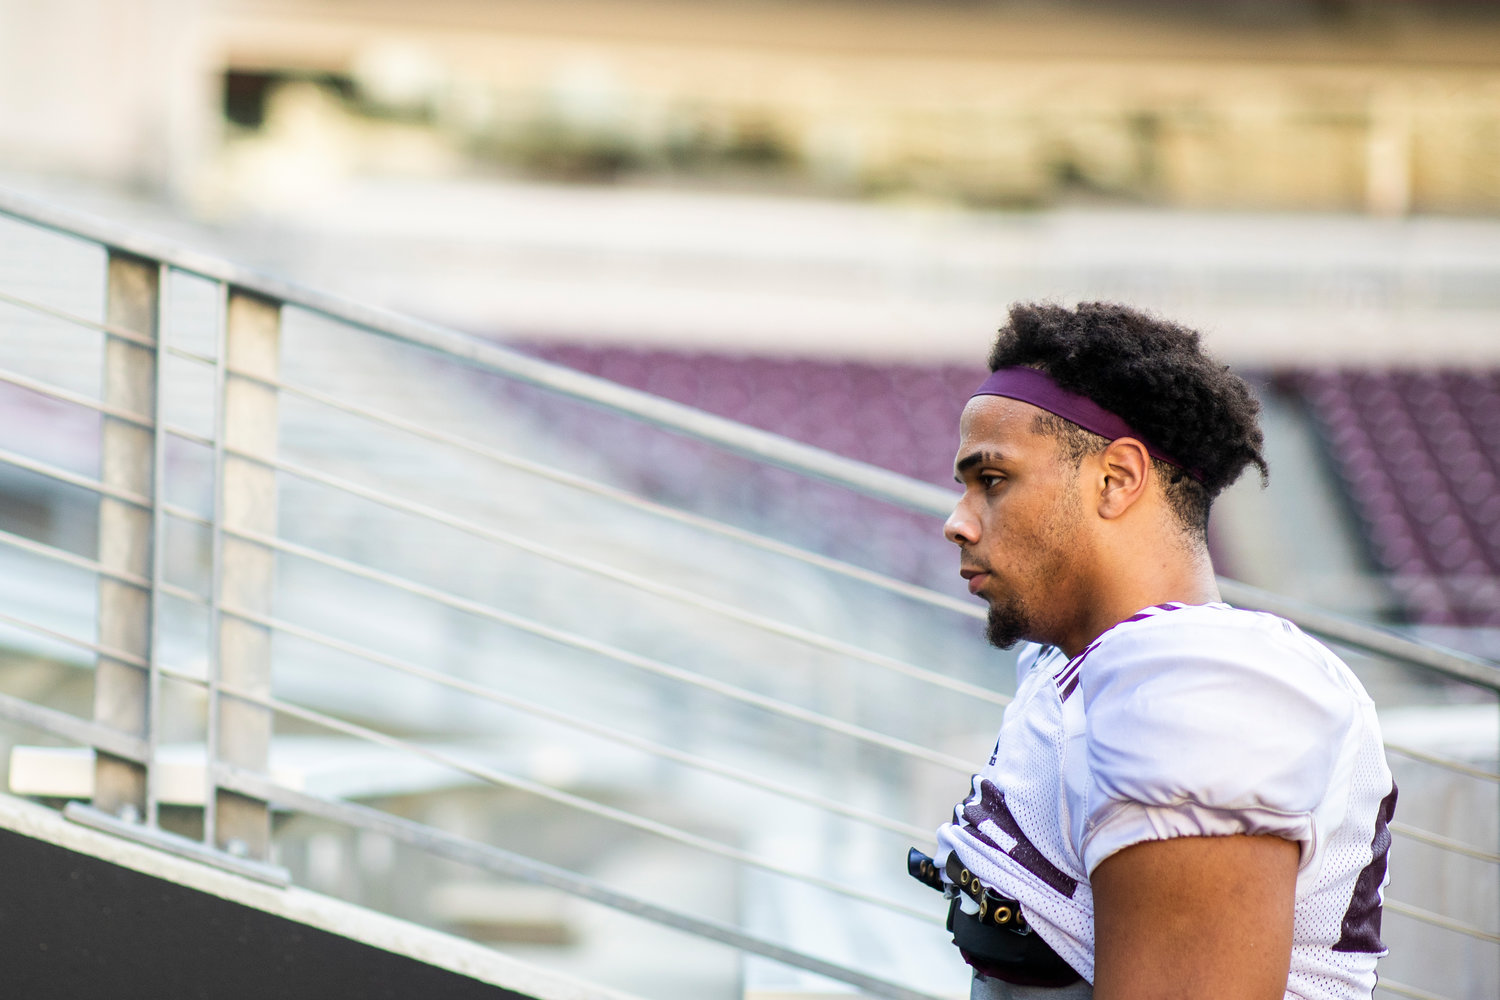 COLLEGE STATION, TX - SEPTEMBER 12, 2020 - Defensive lineman Braedon Mowry #46 of the Texas A&M Aggies during the football scrimmage at Kyle Field in College Station, TX. Photo By Craig Bisacre/Texas A&M Athletics